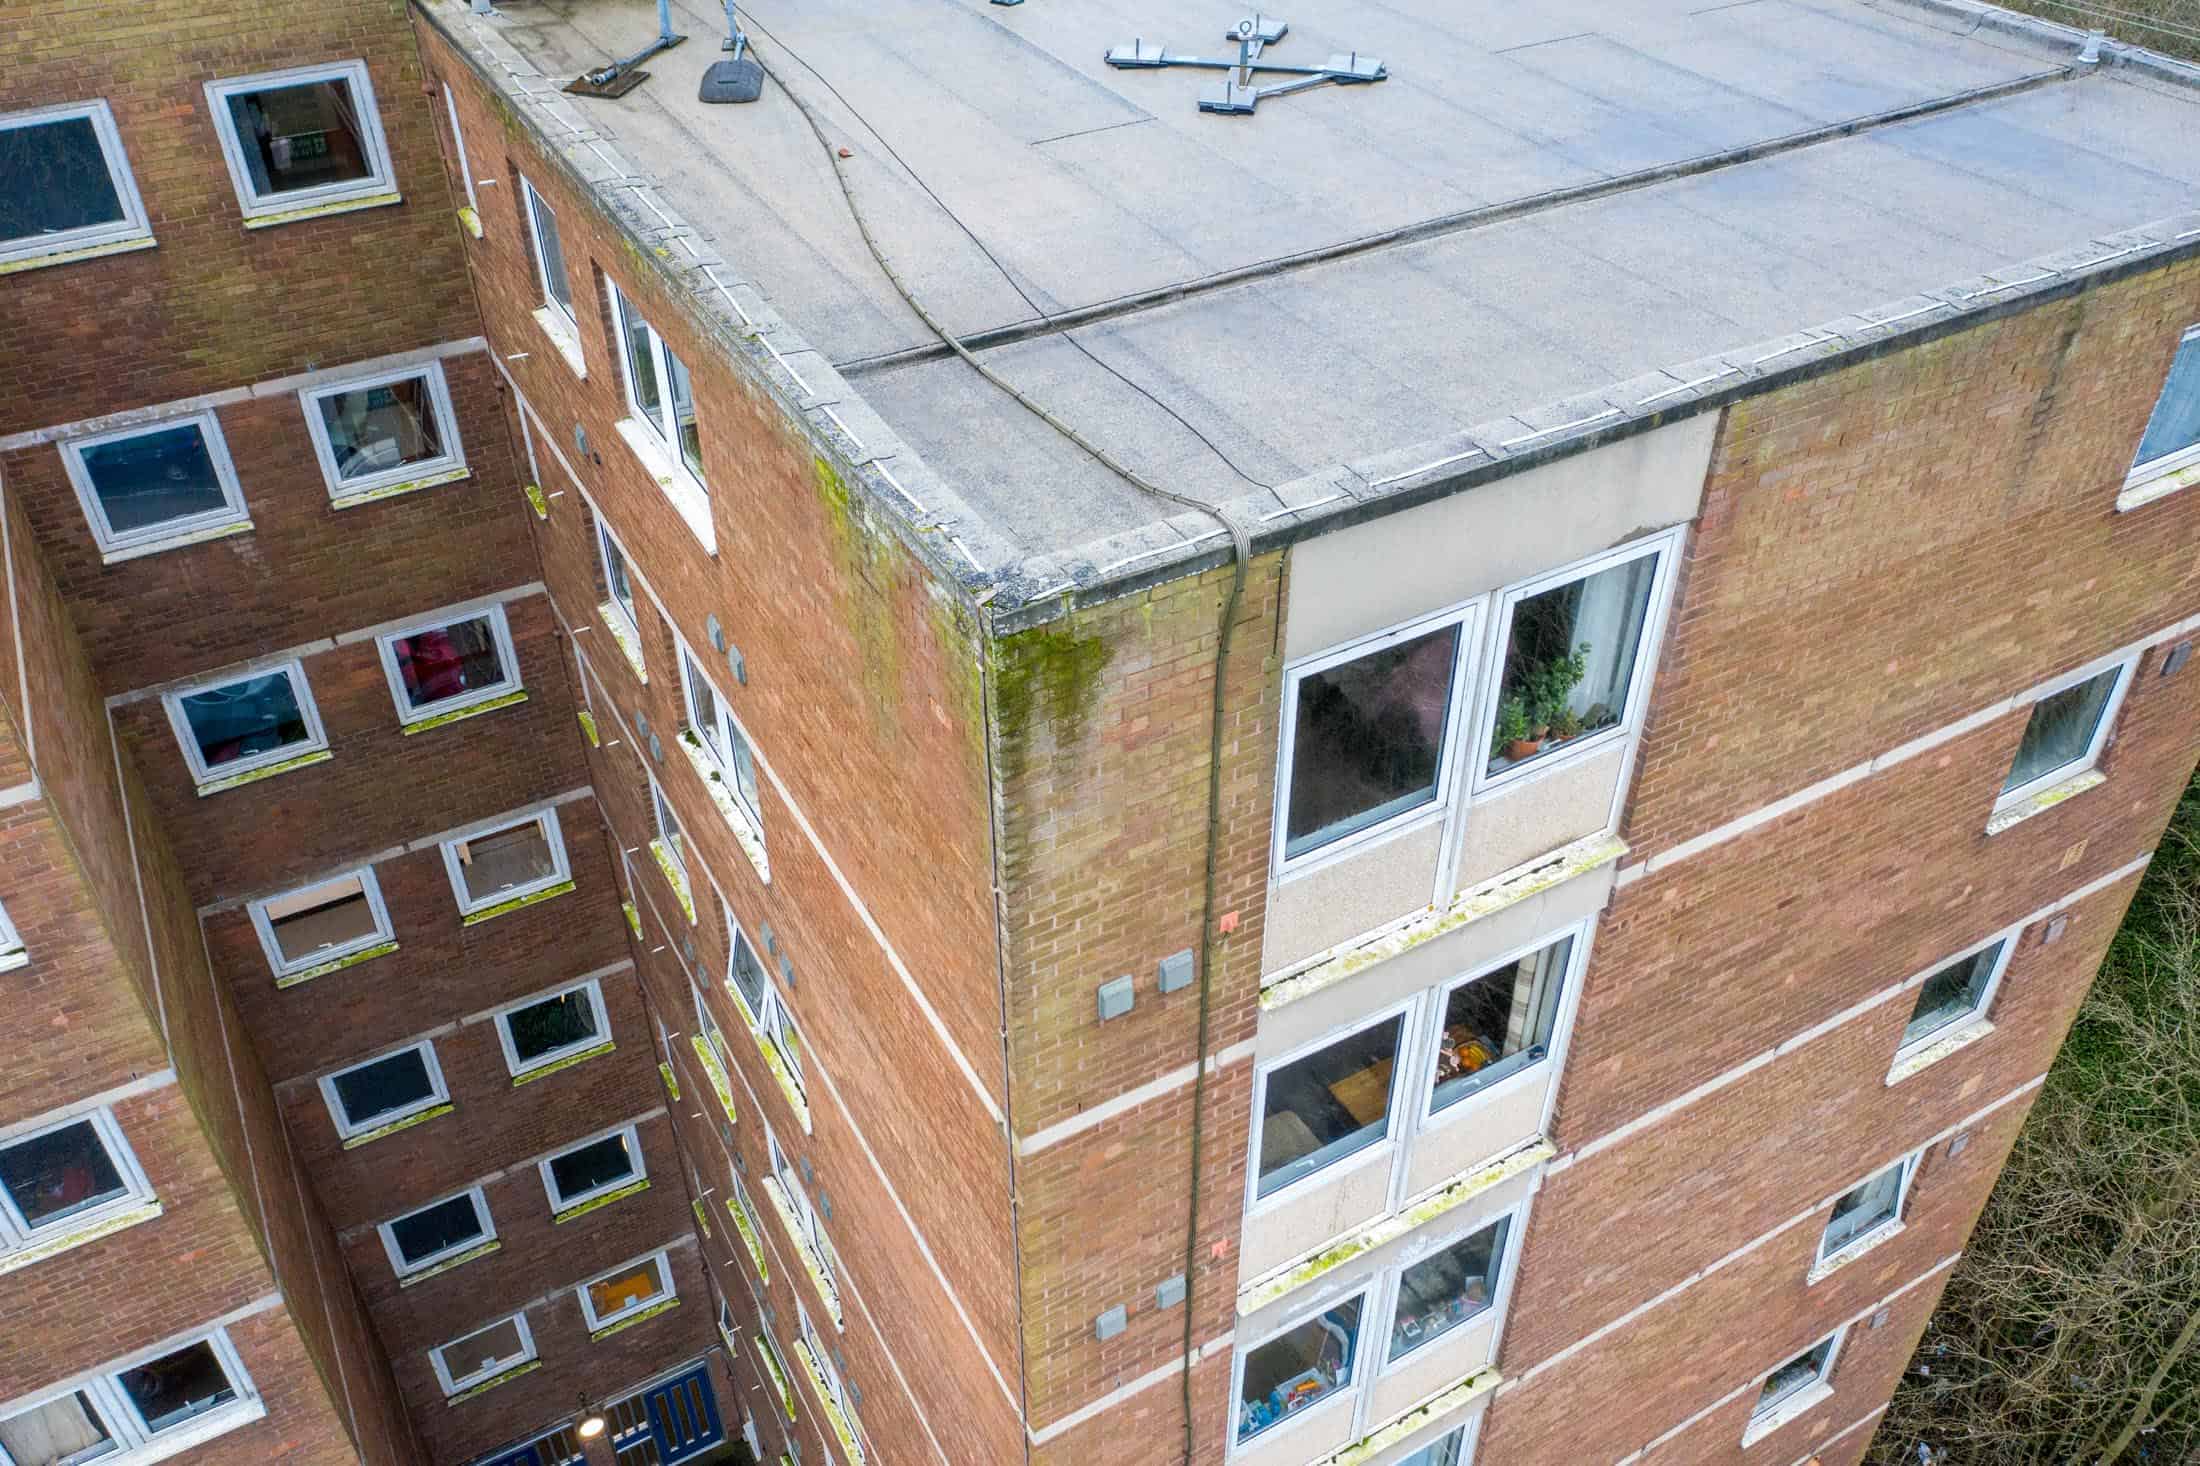 Aerial view of tower block for aerial roof inspection